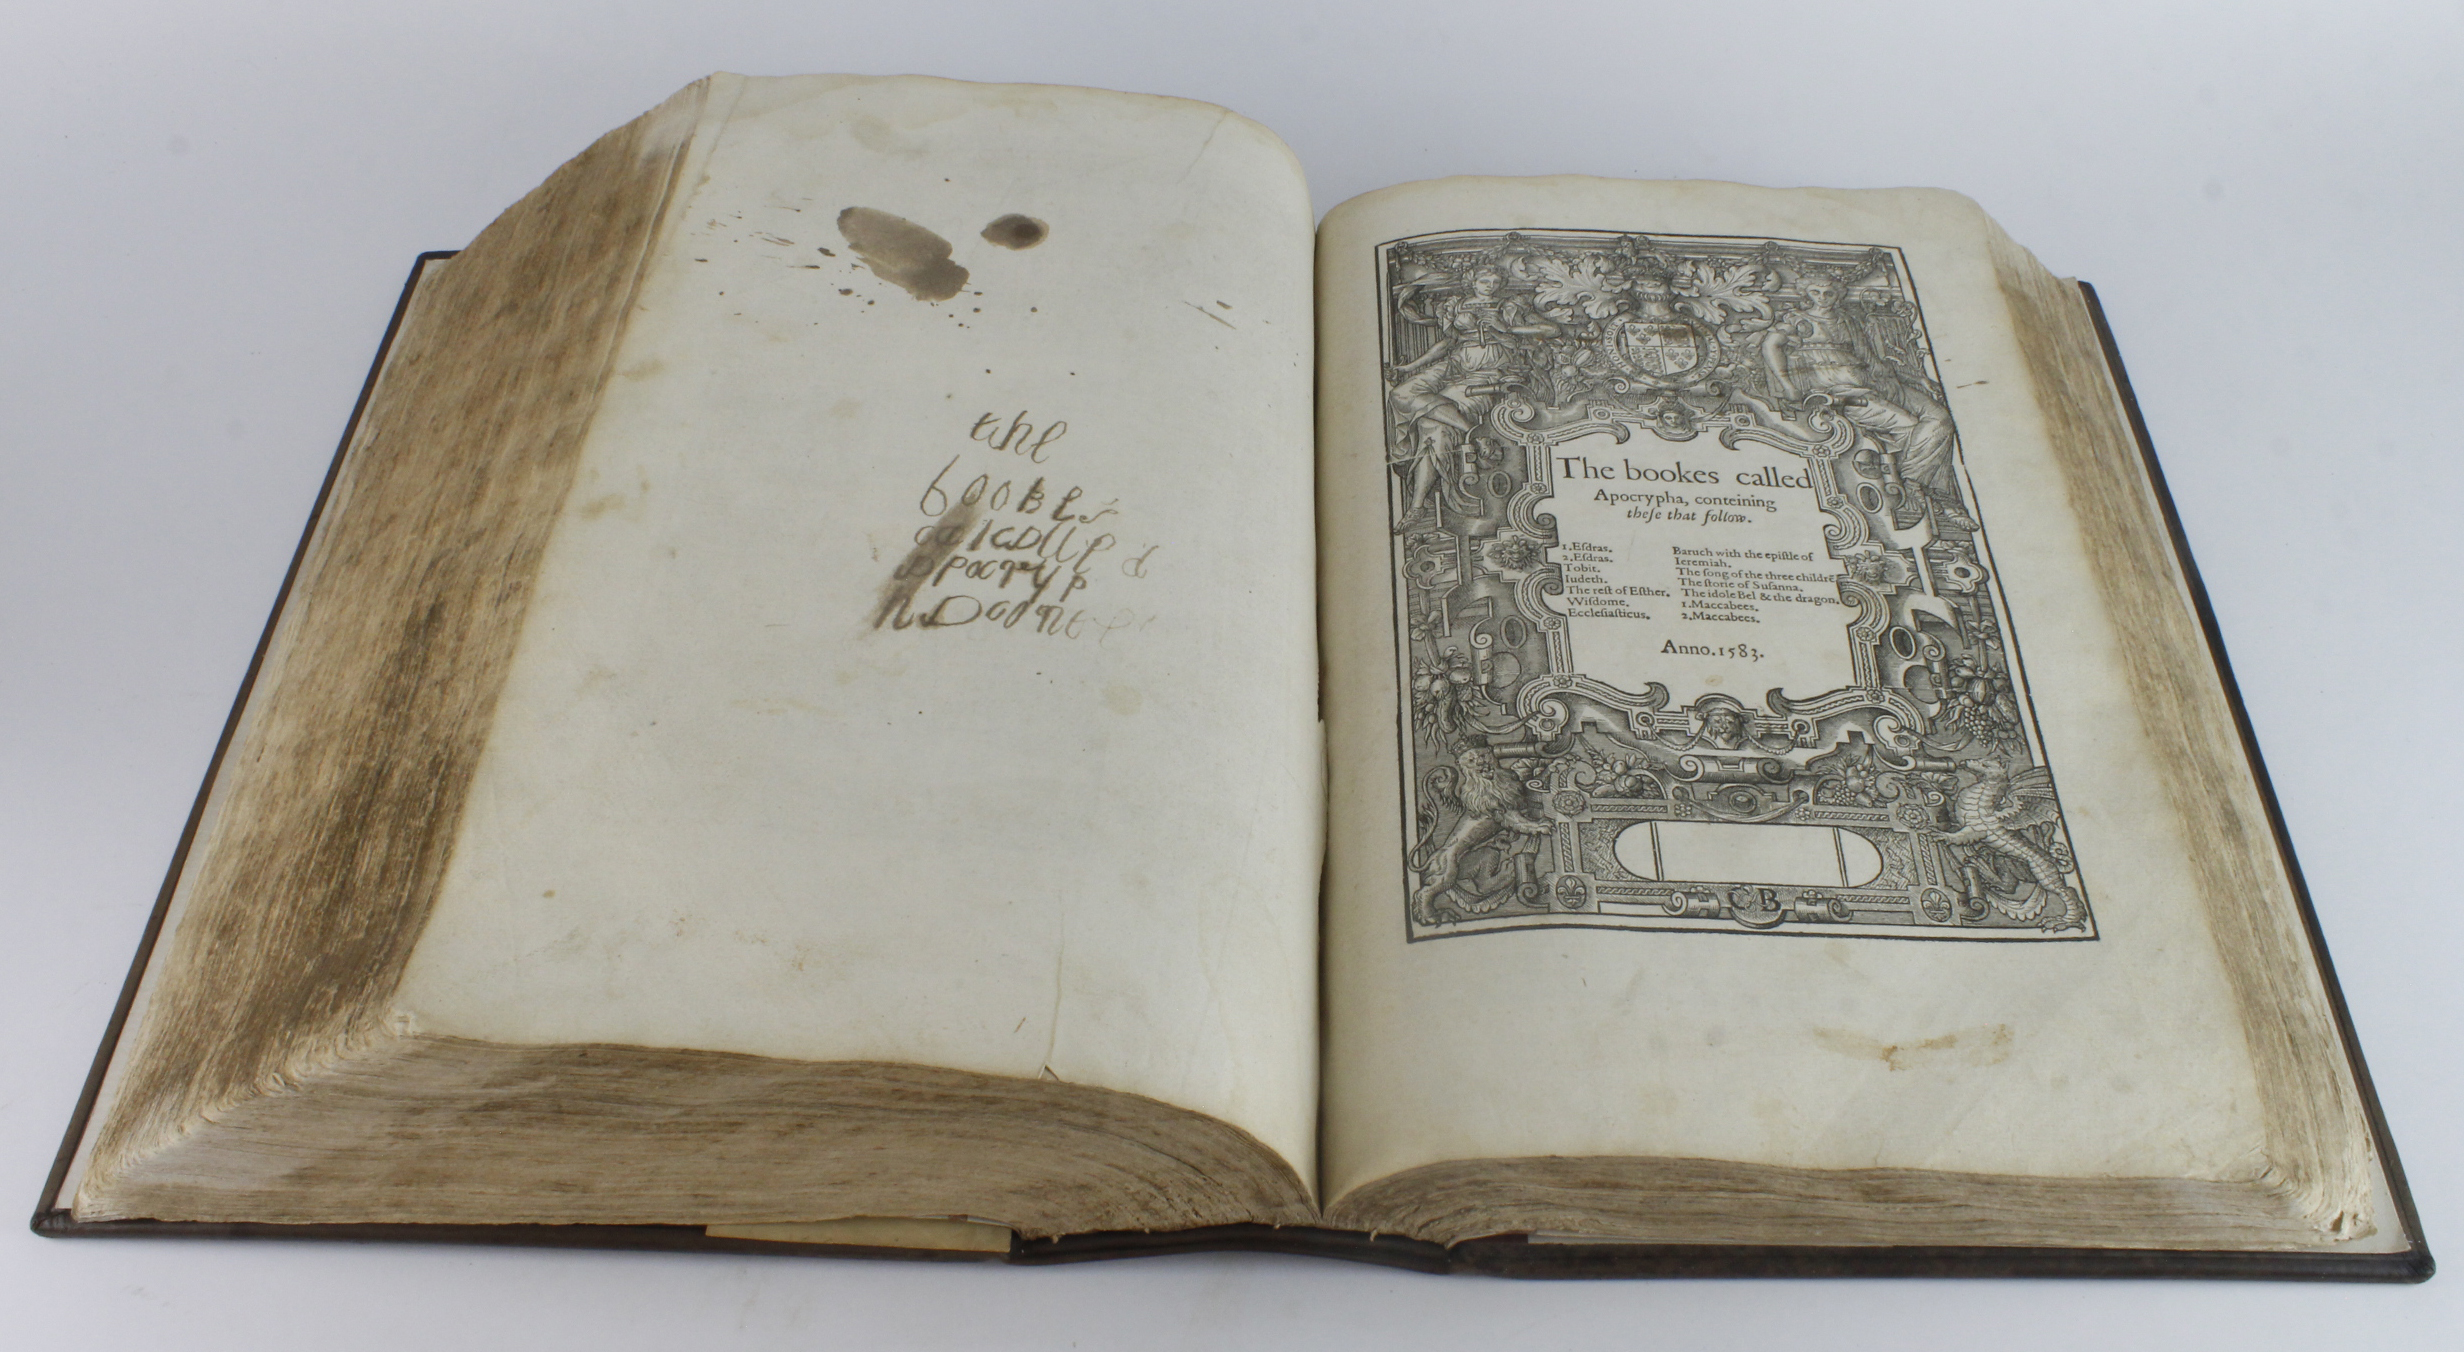 Geneva Bible, Imprinted by Christopher Barker, circa 1583, lacking title (volume starts Aiii), New - Image 3 of 4